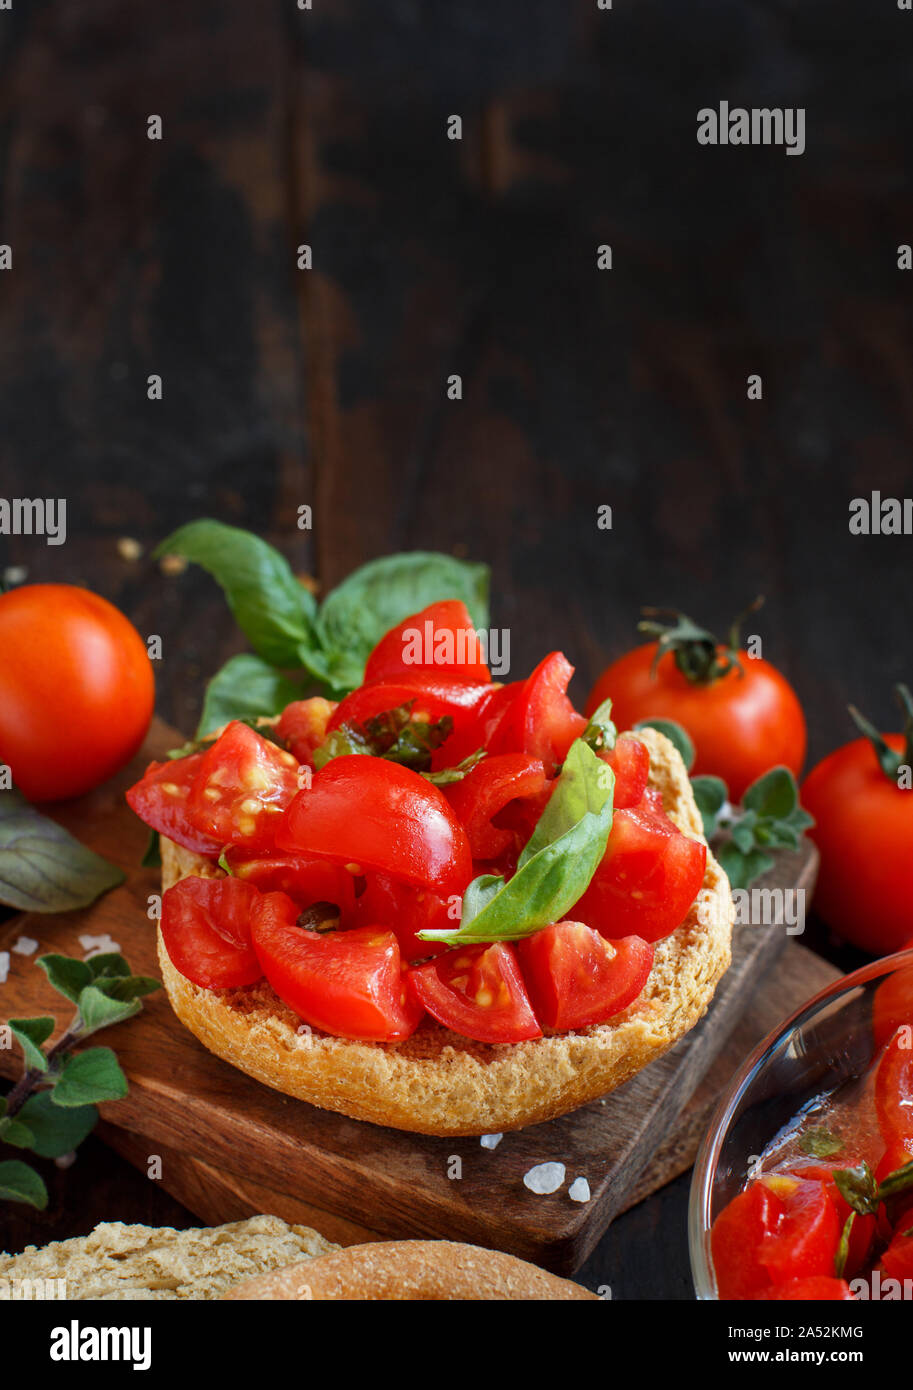 Frisella, typical south italian bread seasond with tomatoes and herbs Stock Photo